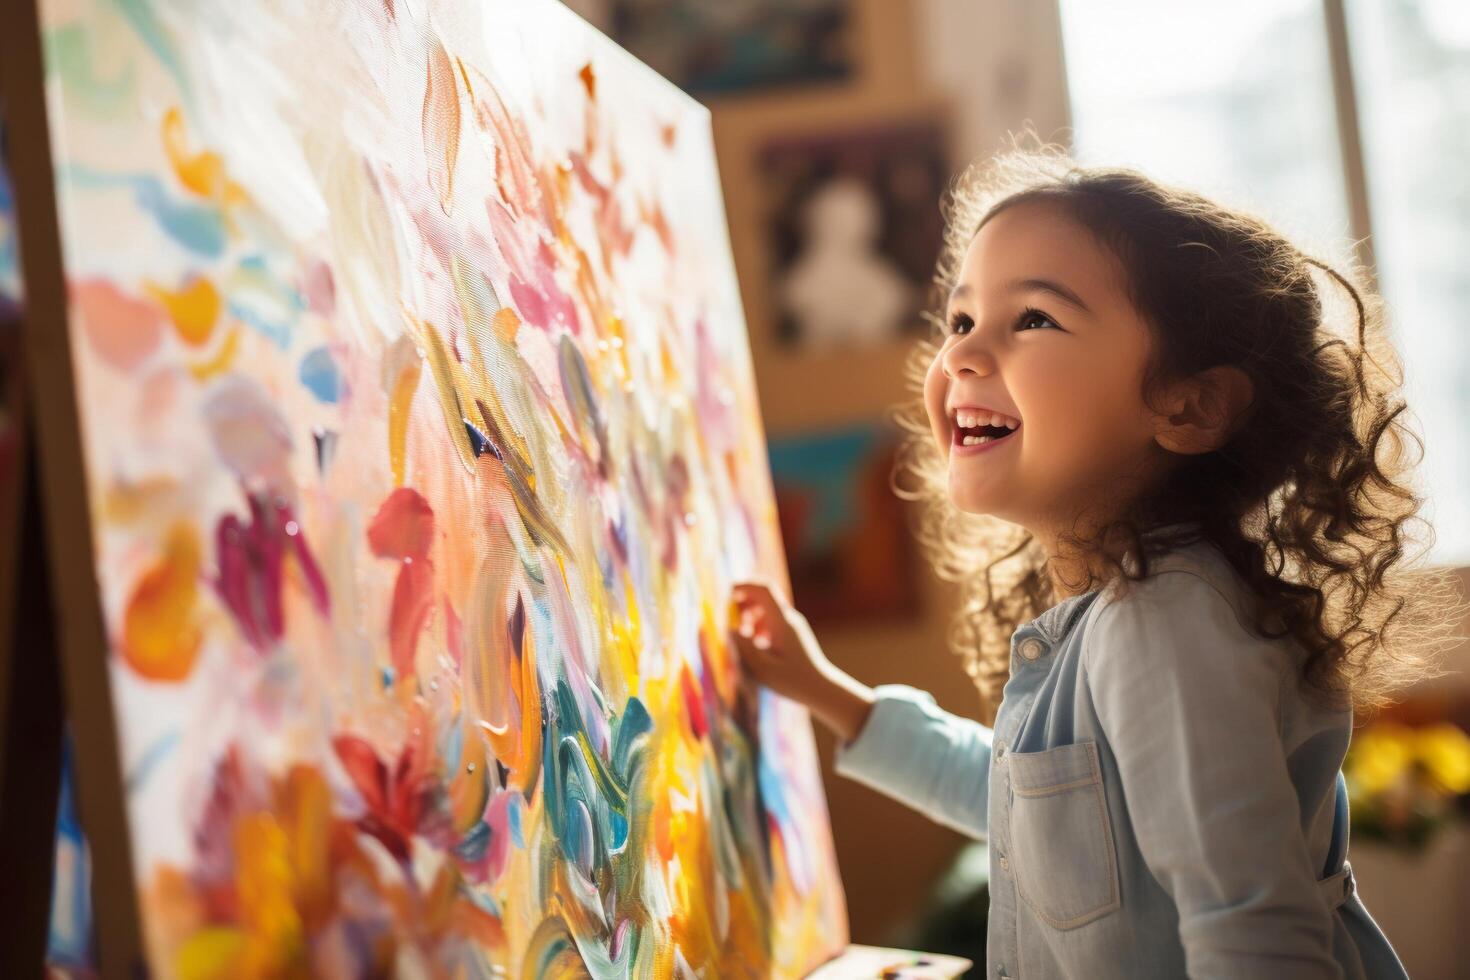 Child focusing on a canvas, room filled with art, soft natural light, closeup photo